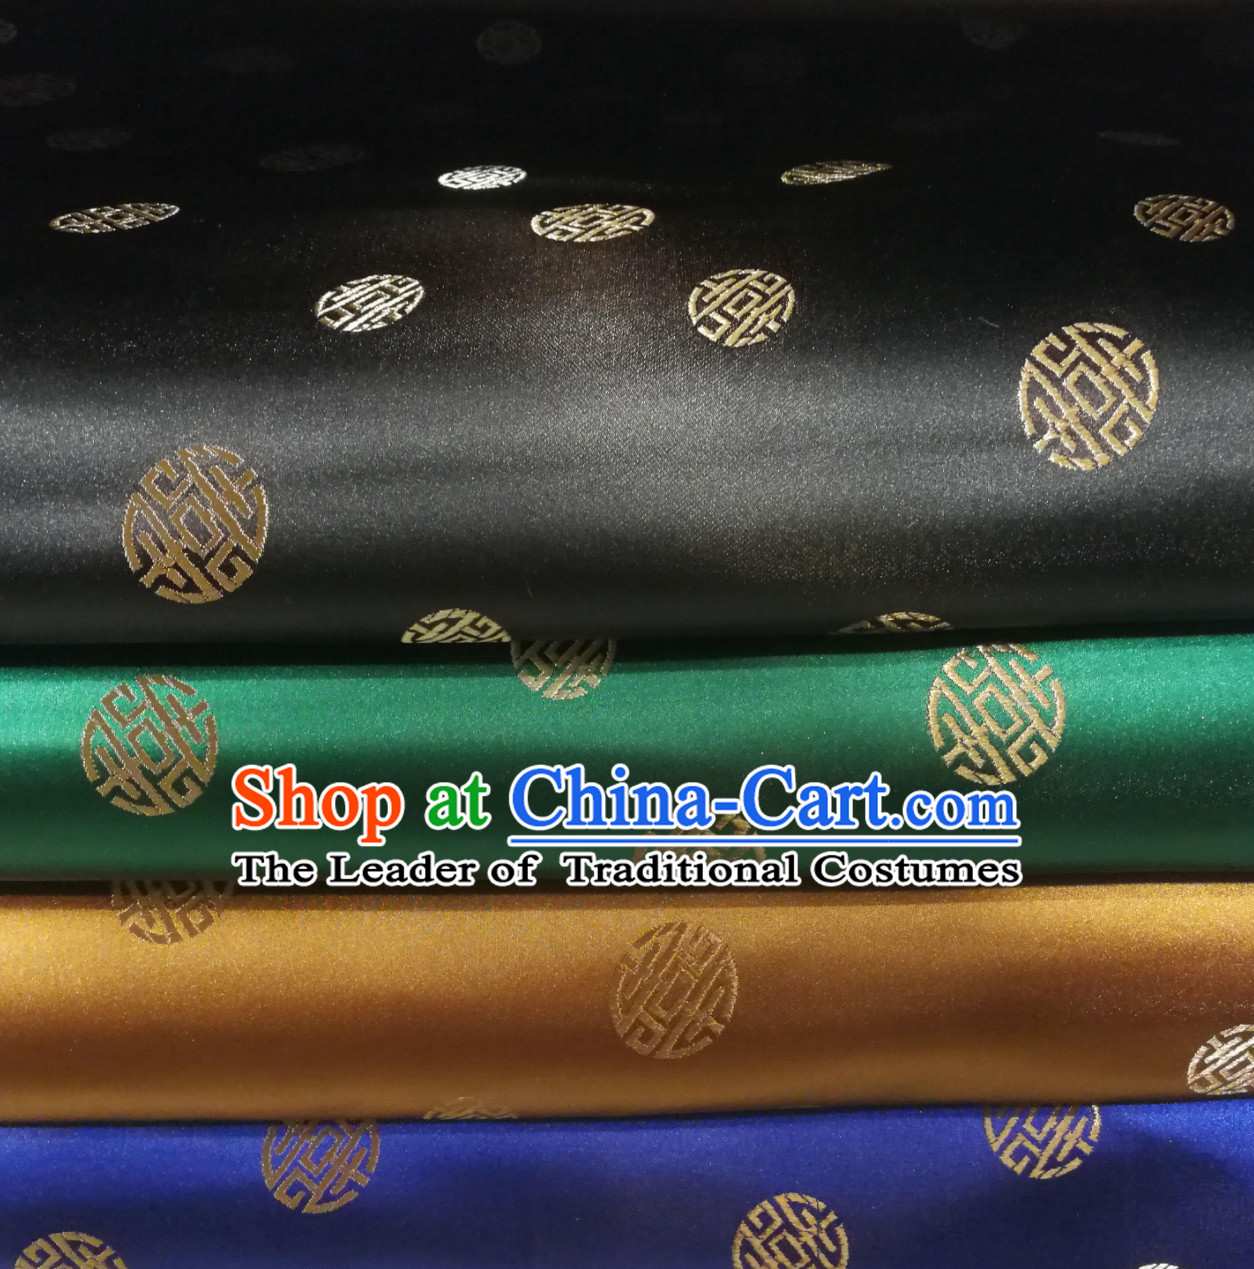 Chinese Royal Palace Style Traditional Pattern Design Brocade Fabric Silk Fabric Chinese Fabric Asian Material